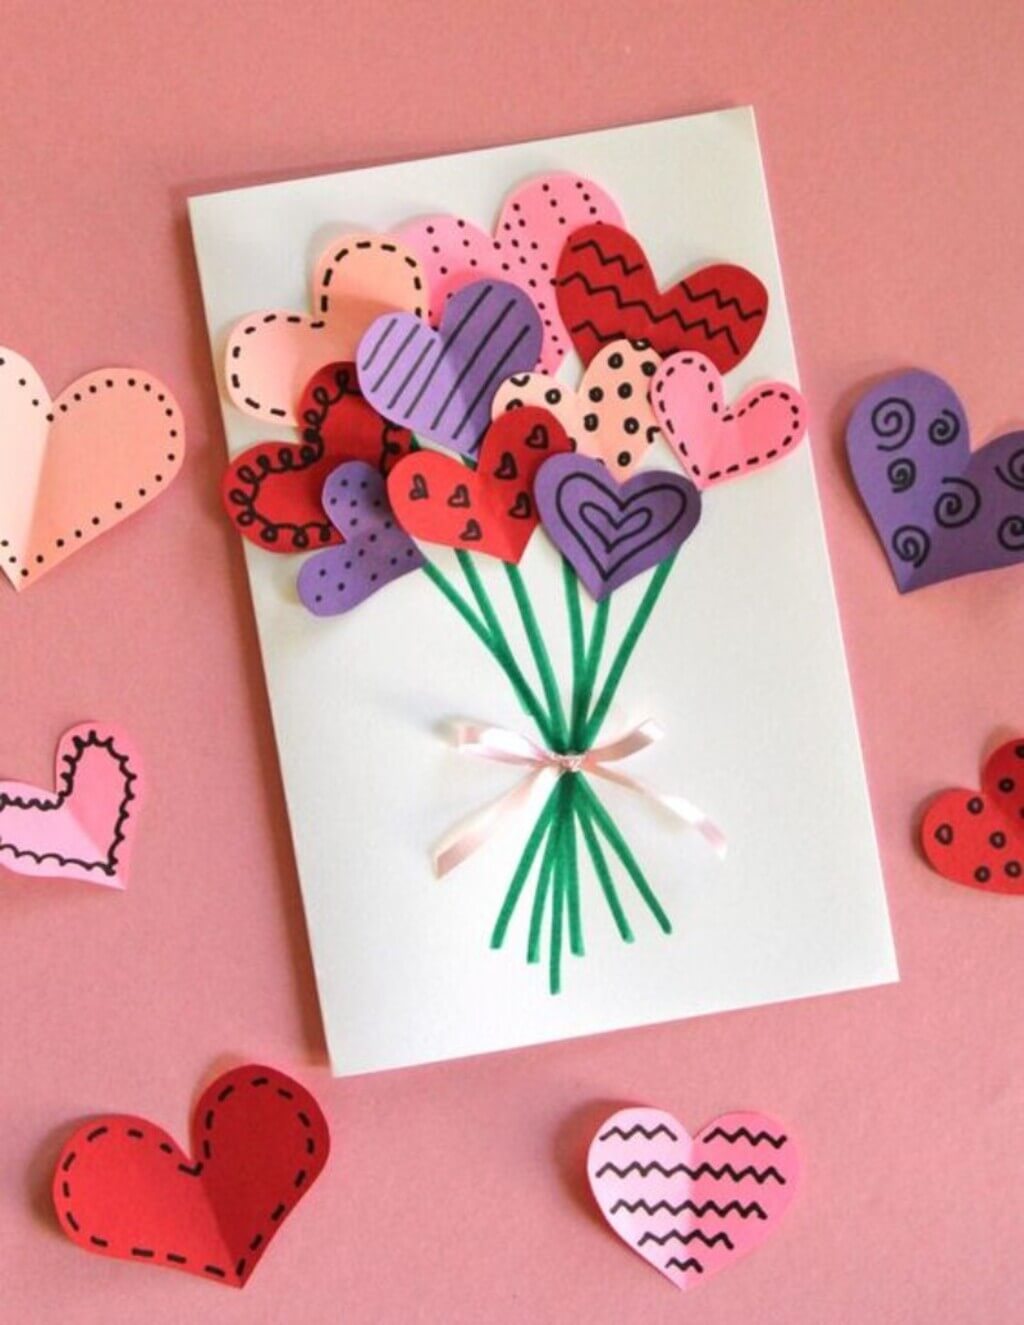 A card with hearts and a bouquet of flowers
